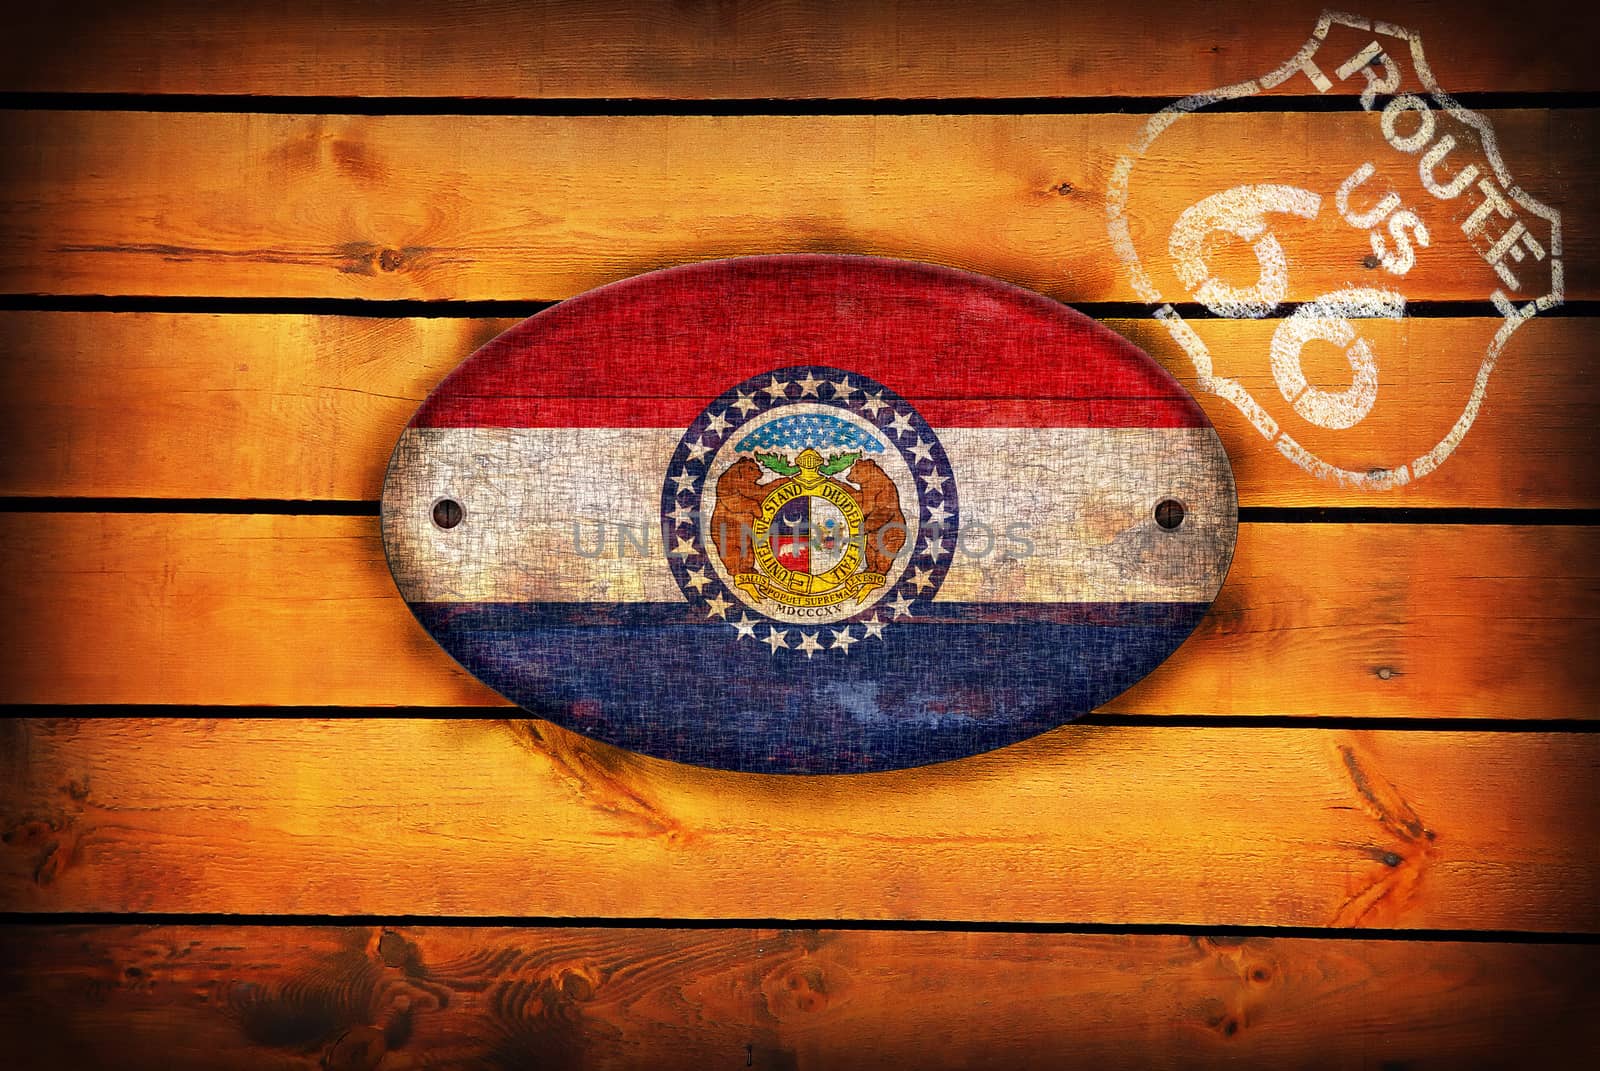 Brown wooden planks with the Missouri flag and shield of Route 66.